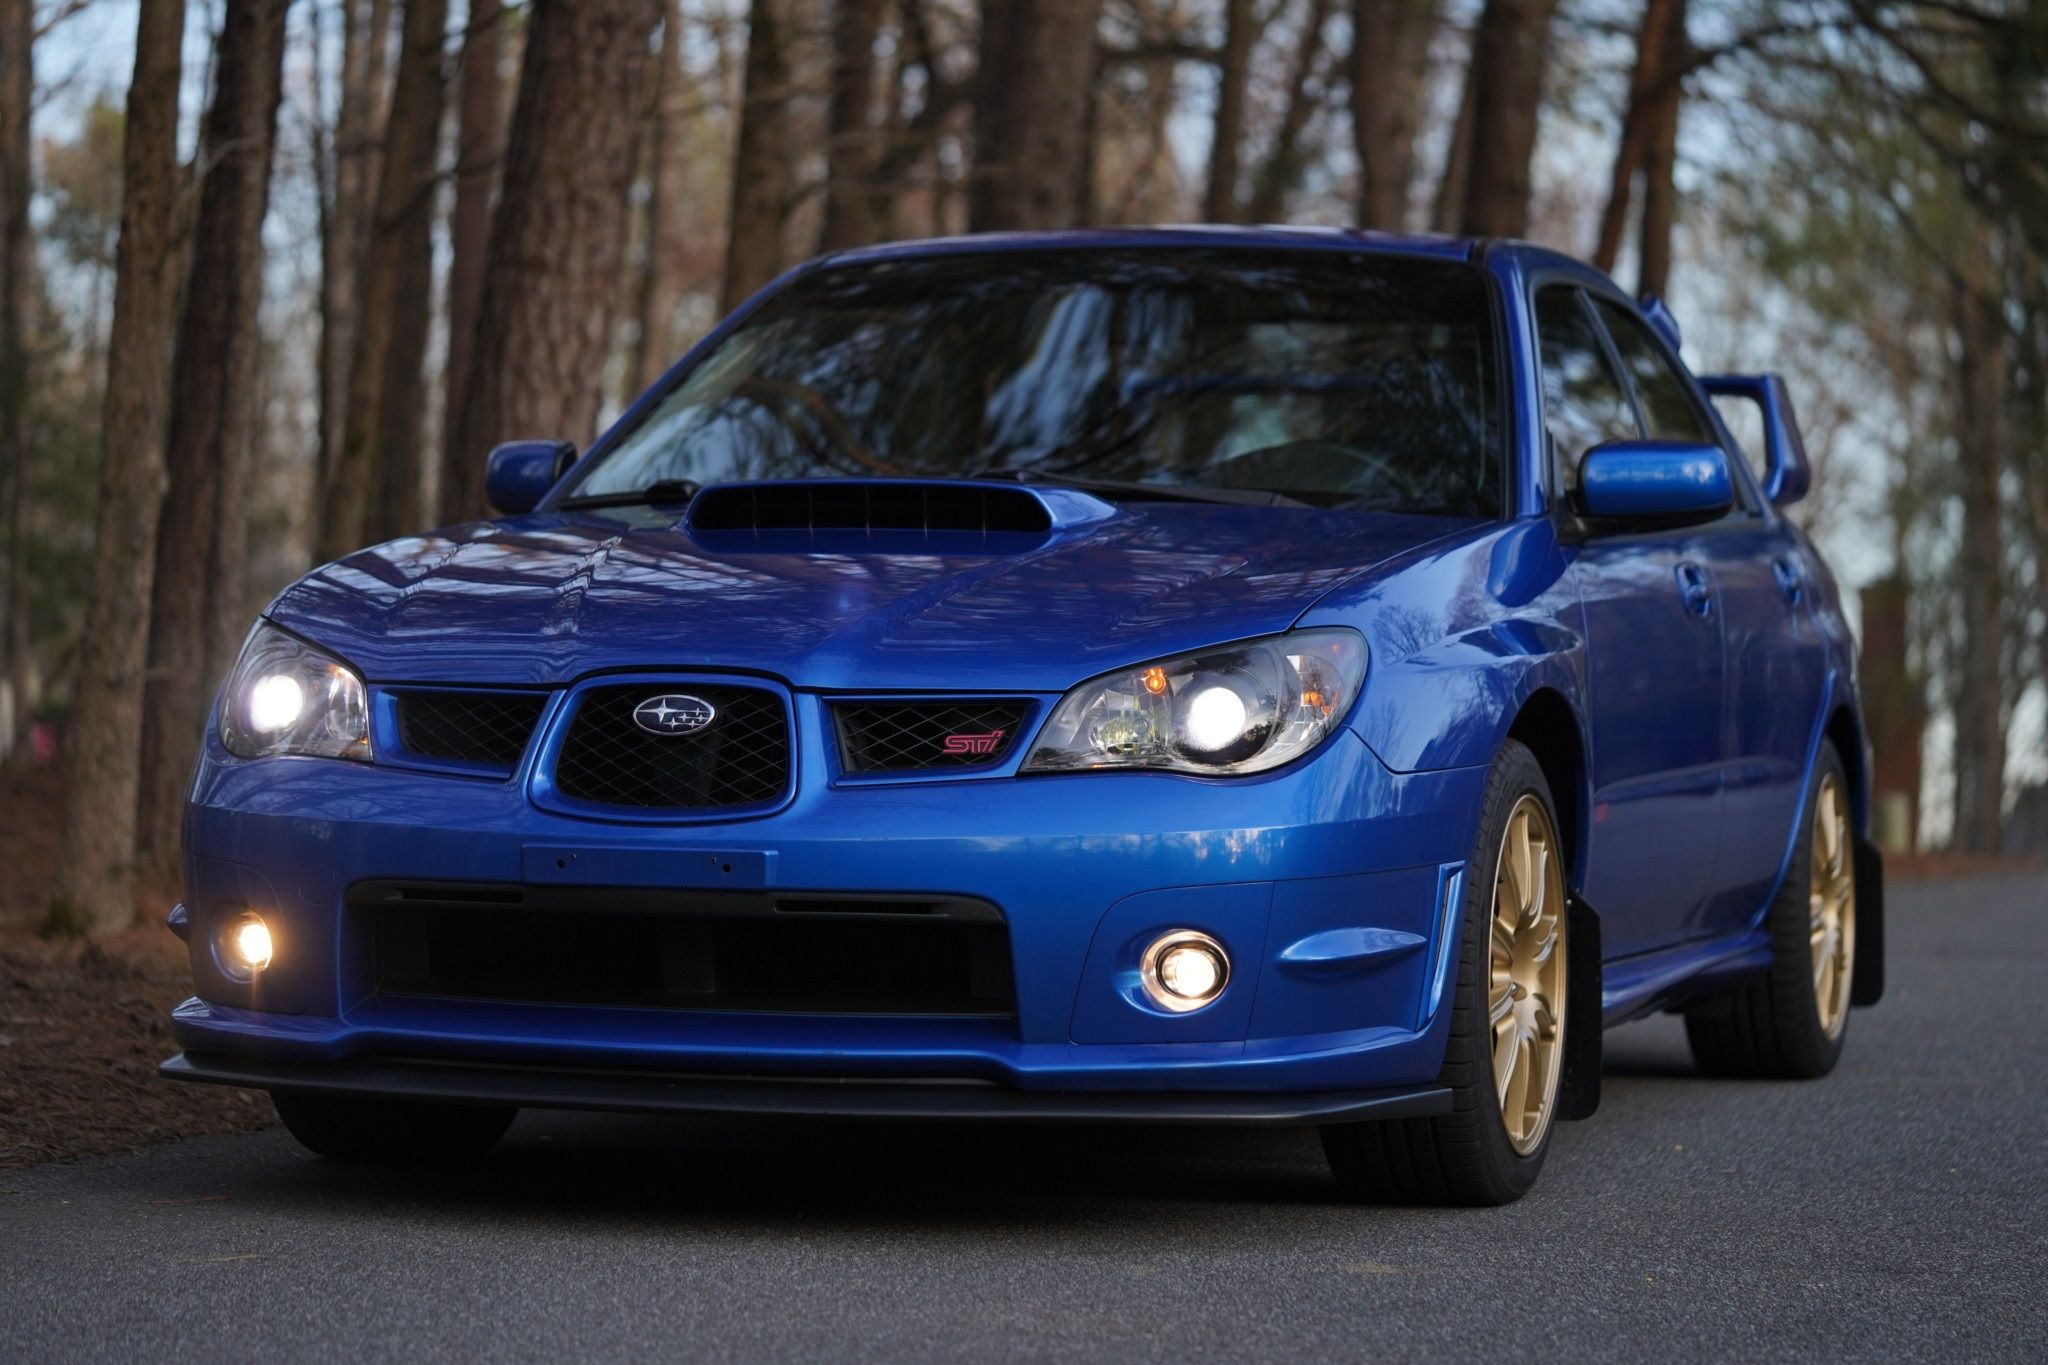 Subaru WRX parked on the road